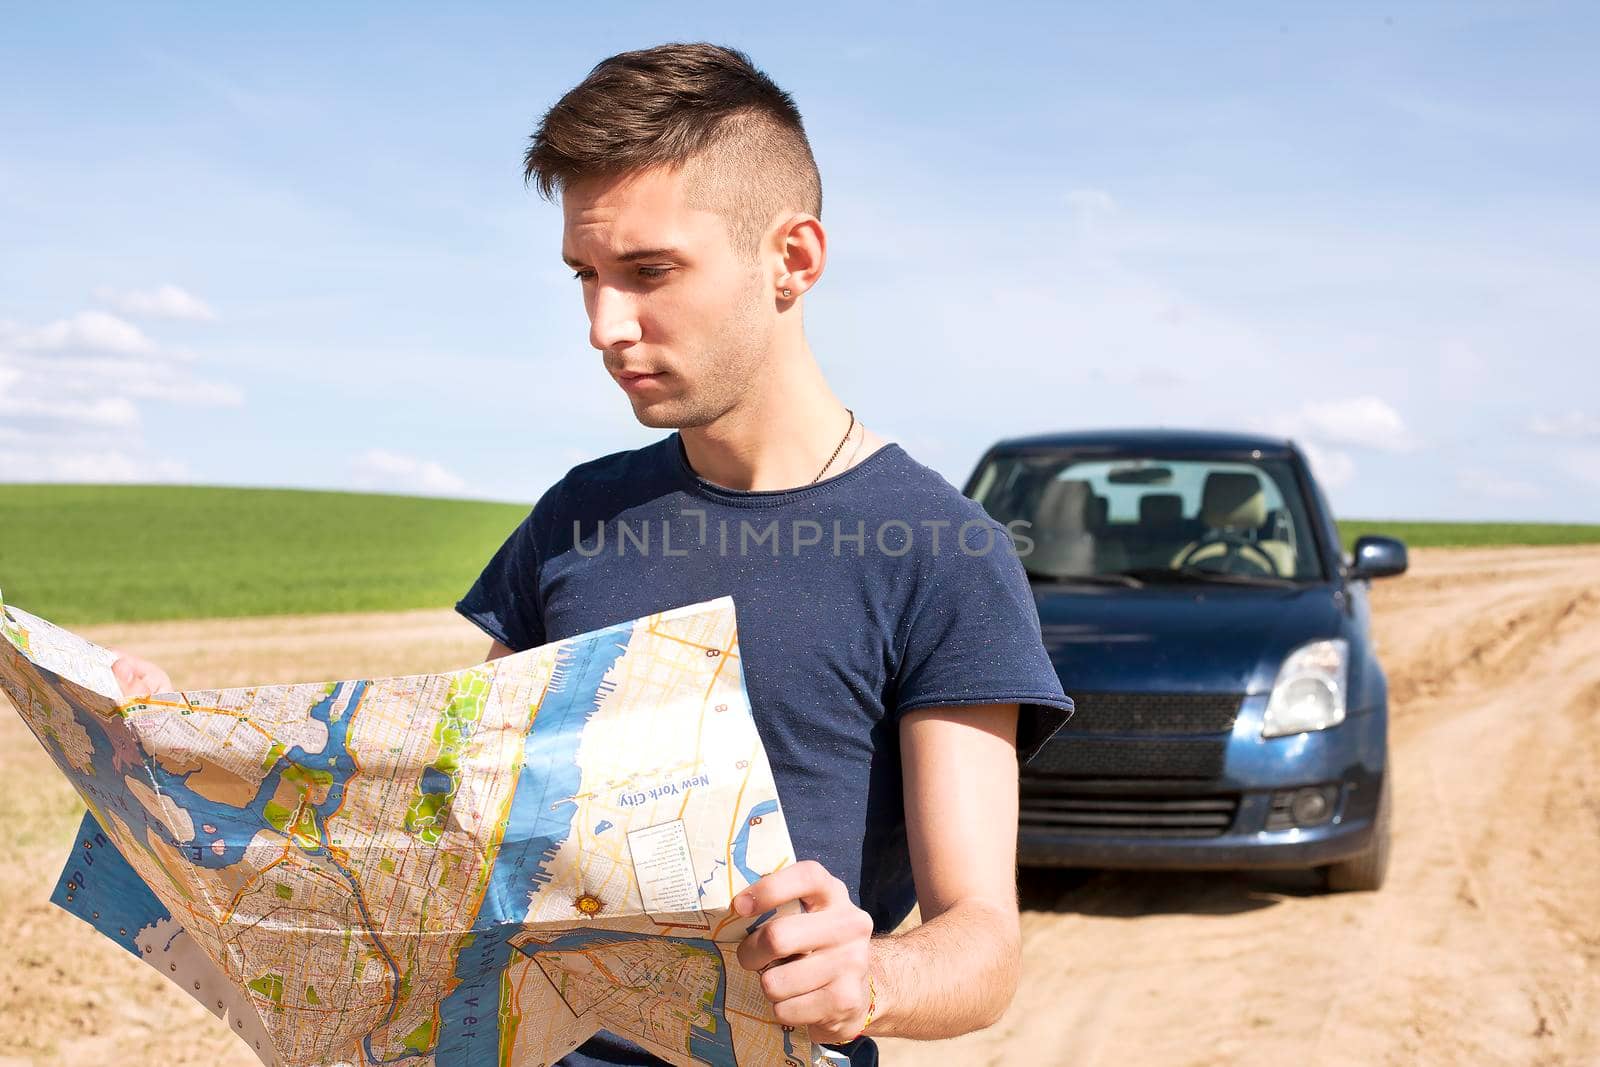 Photo of a traveler parked his car by the side of a road, lost and reading the NYC map. Focus on the map and male.